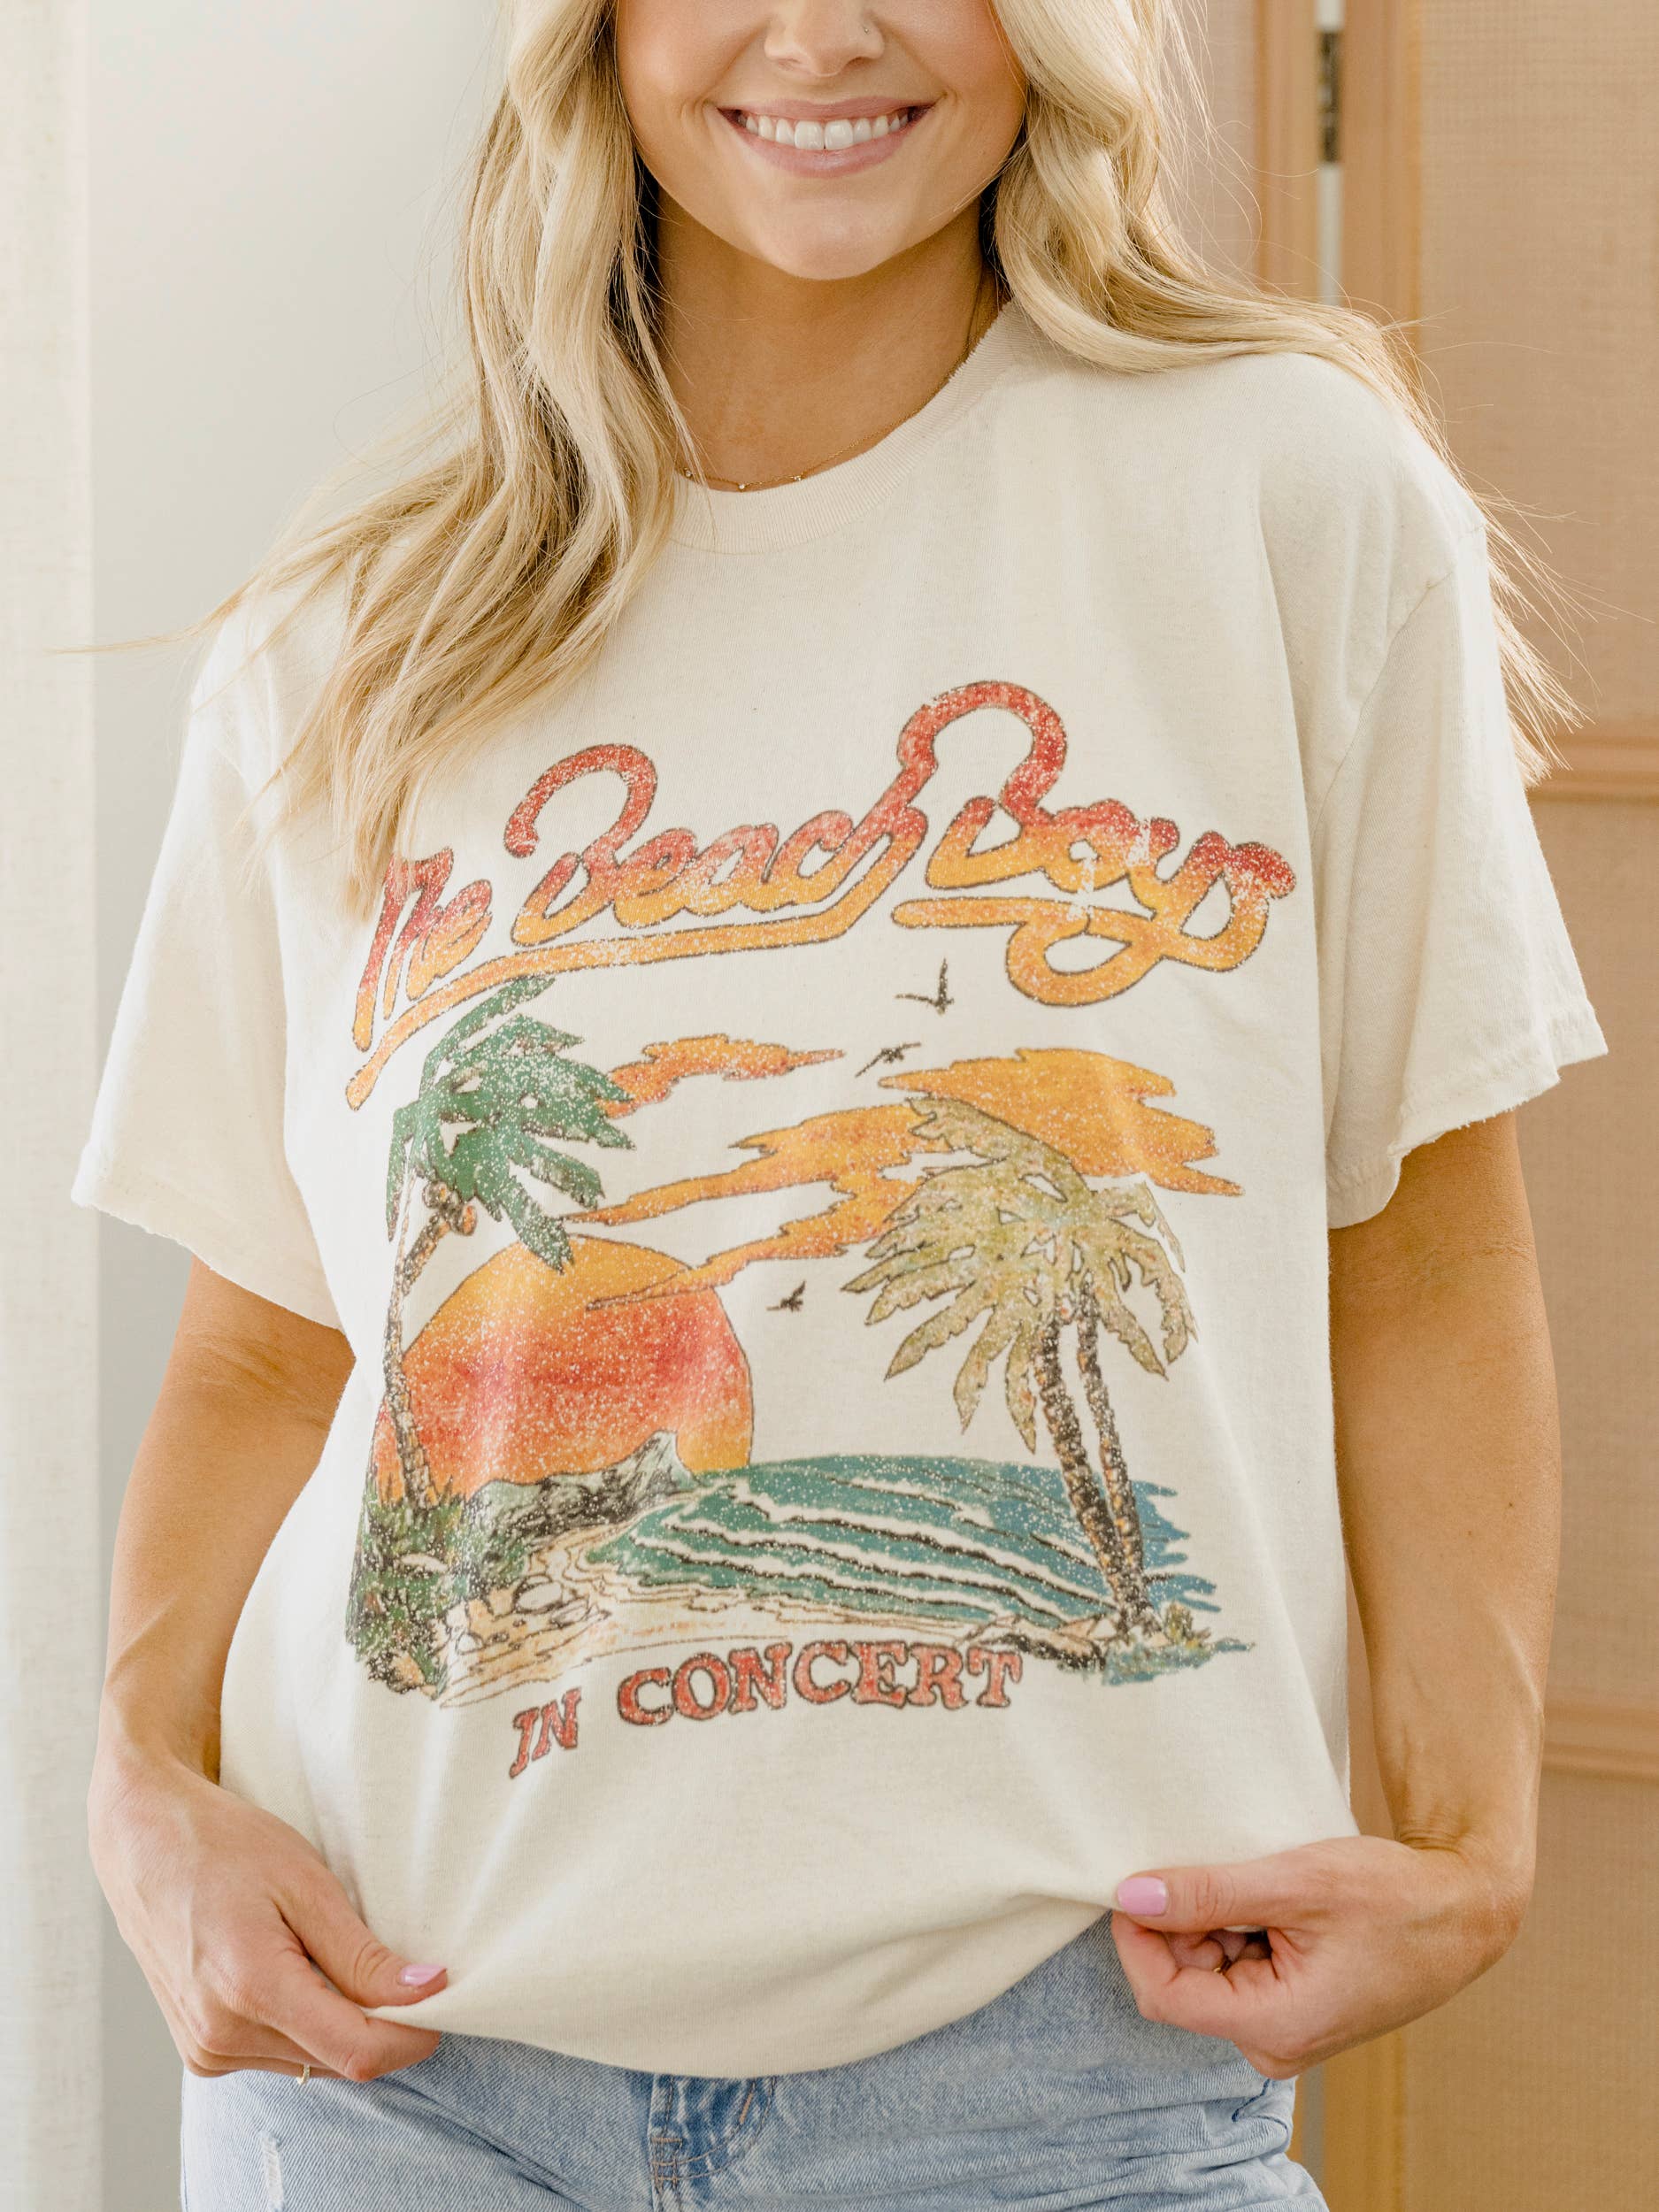 LivyLu - The Beach Boys In Concert Off White Thrifted Graphic Tee